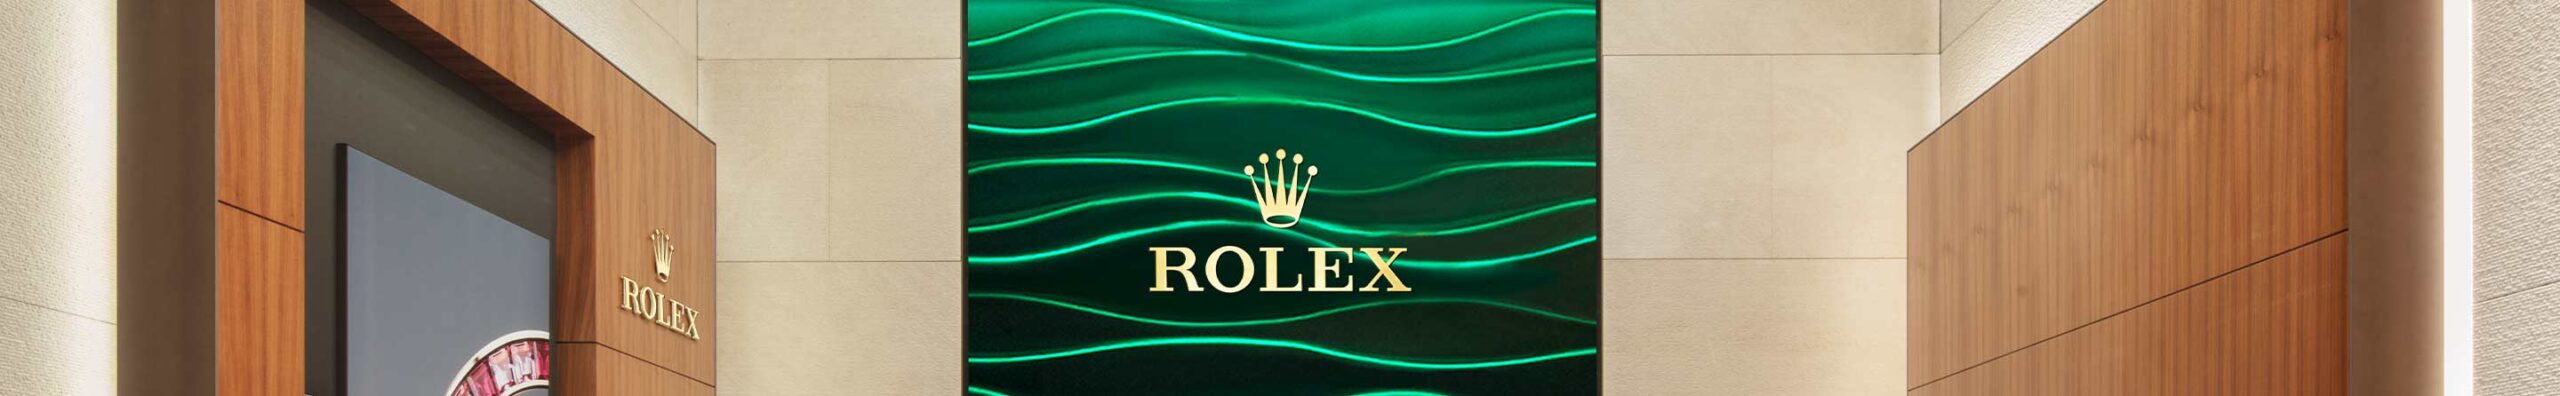 Rolex-Malaysia-Swee-Cheong-Store-Desktop-Banner-New